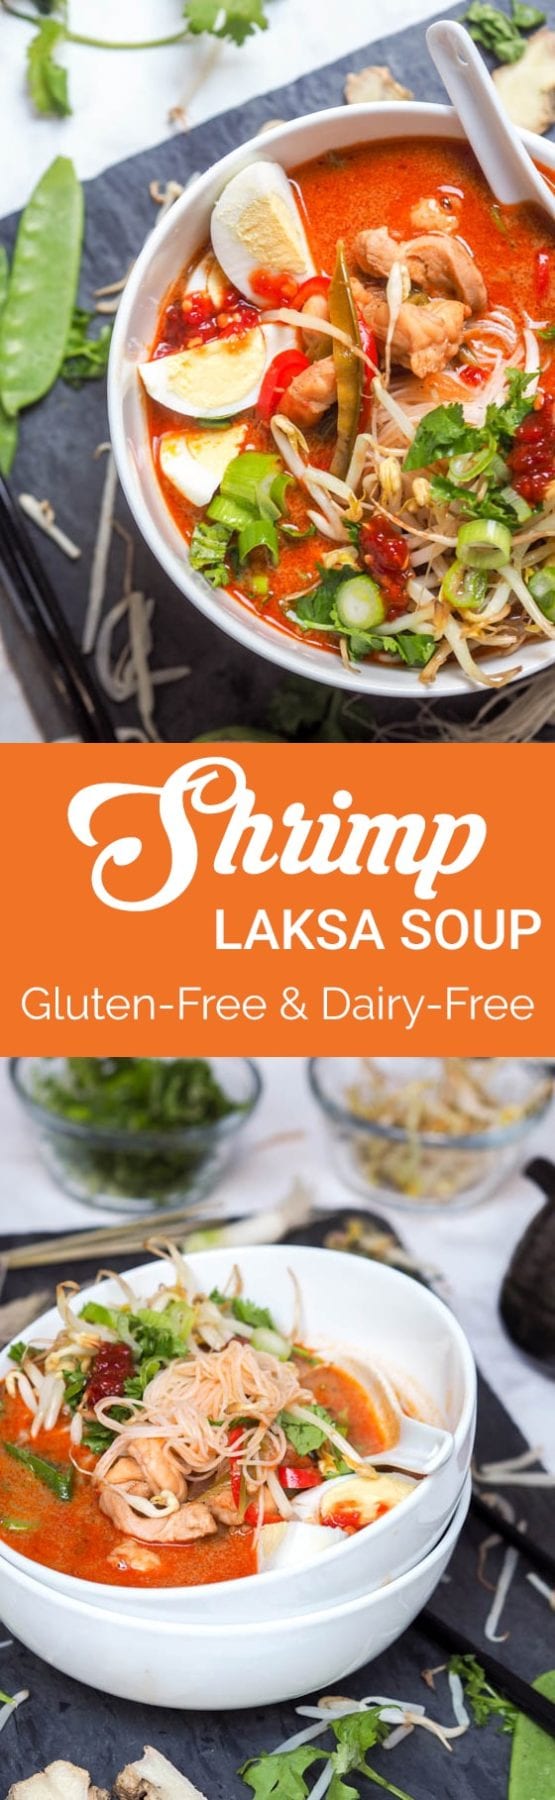 Shrimp and Chicken Laksa soup- A Malaysian style soup with a creamy coconut milk base and incredible depth of flavors thanks to ginger, fish sauce, lemongrass and other spices. A true favorite. Gluten-Free and Dairy-Free too.